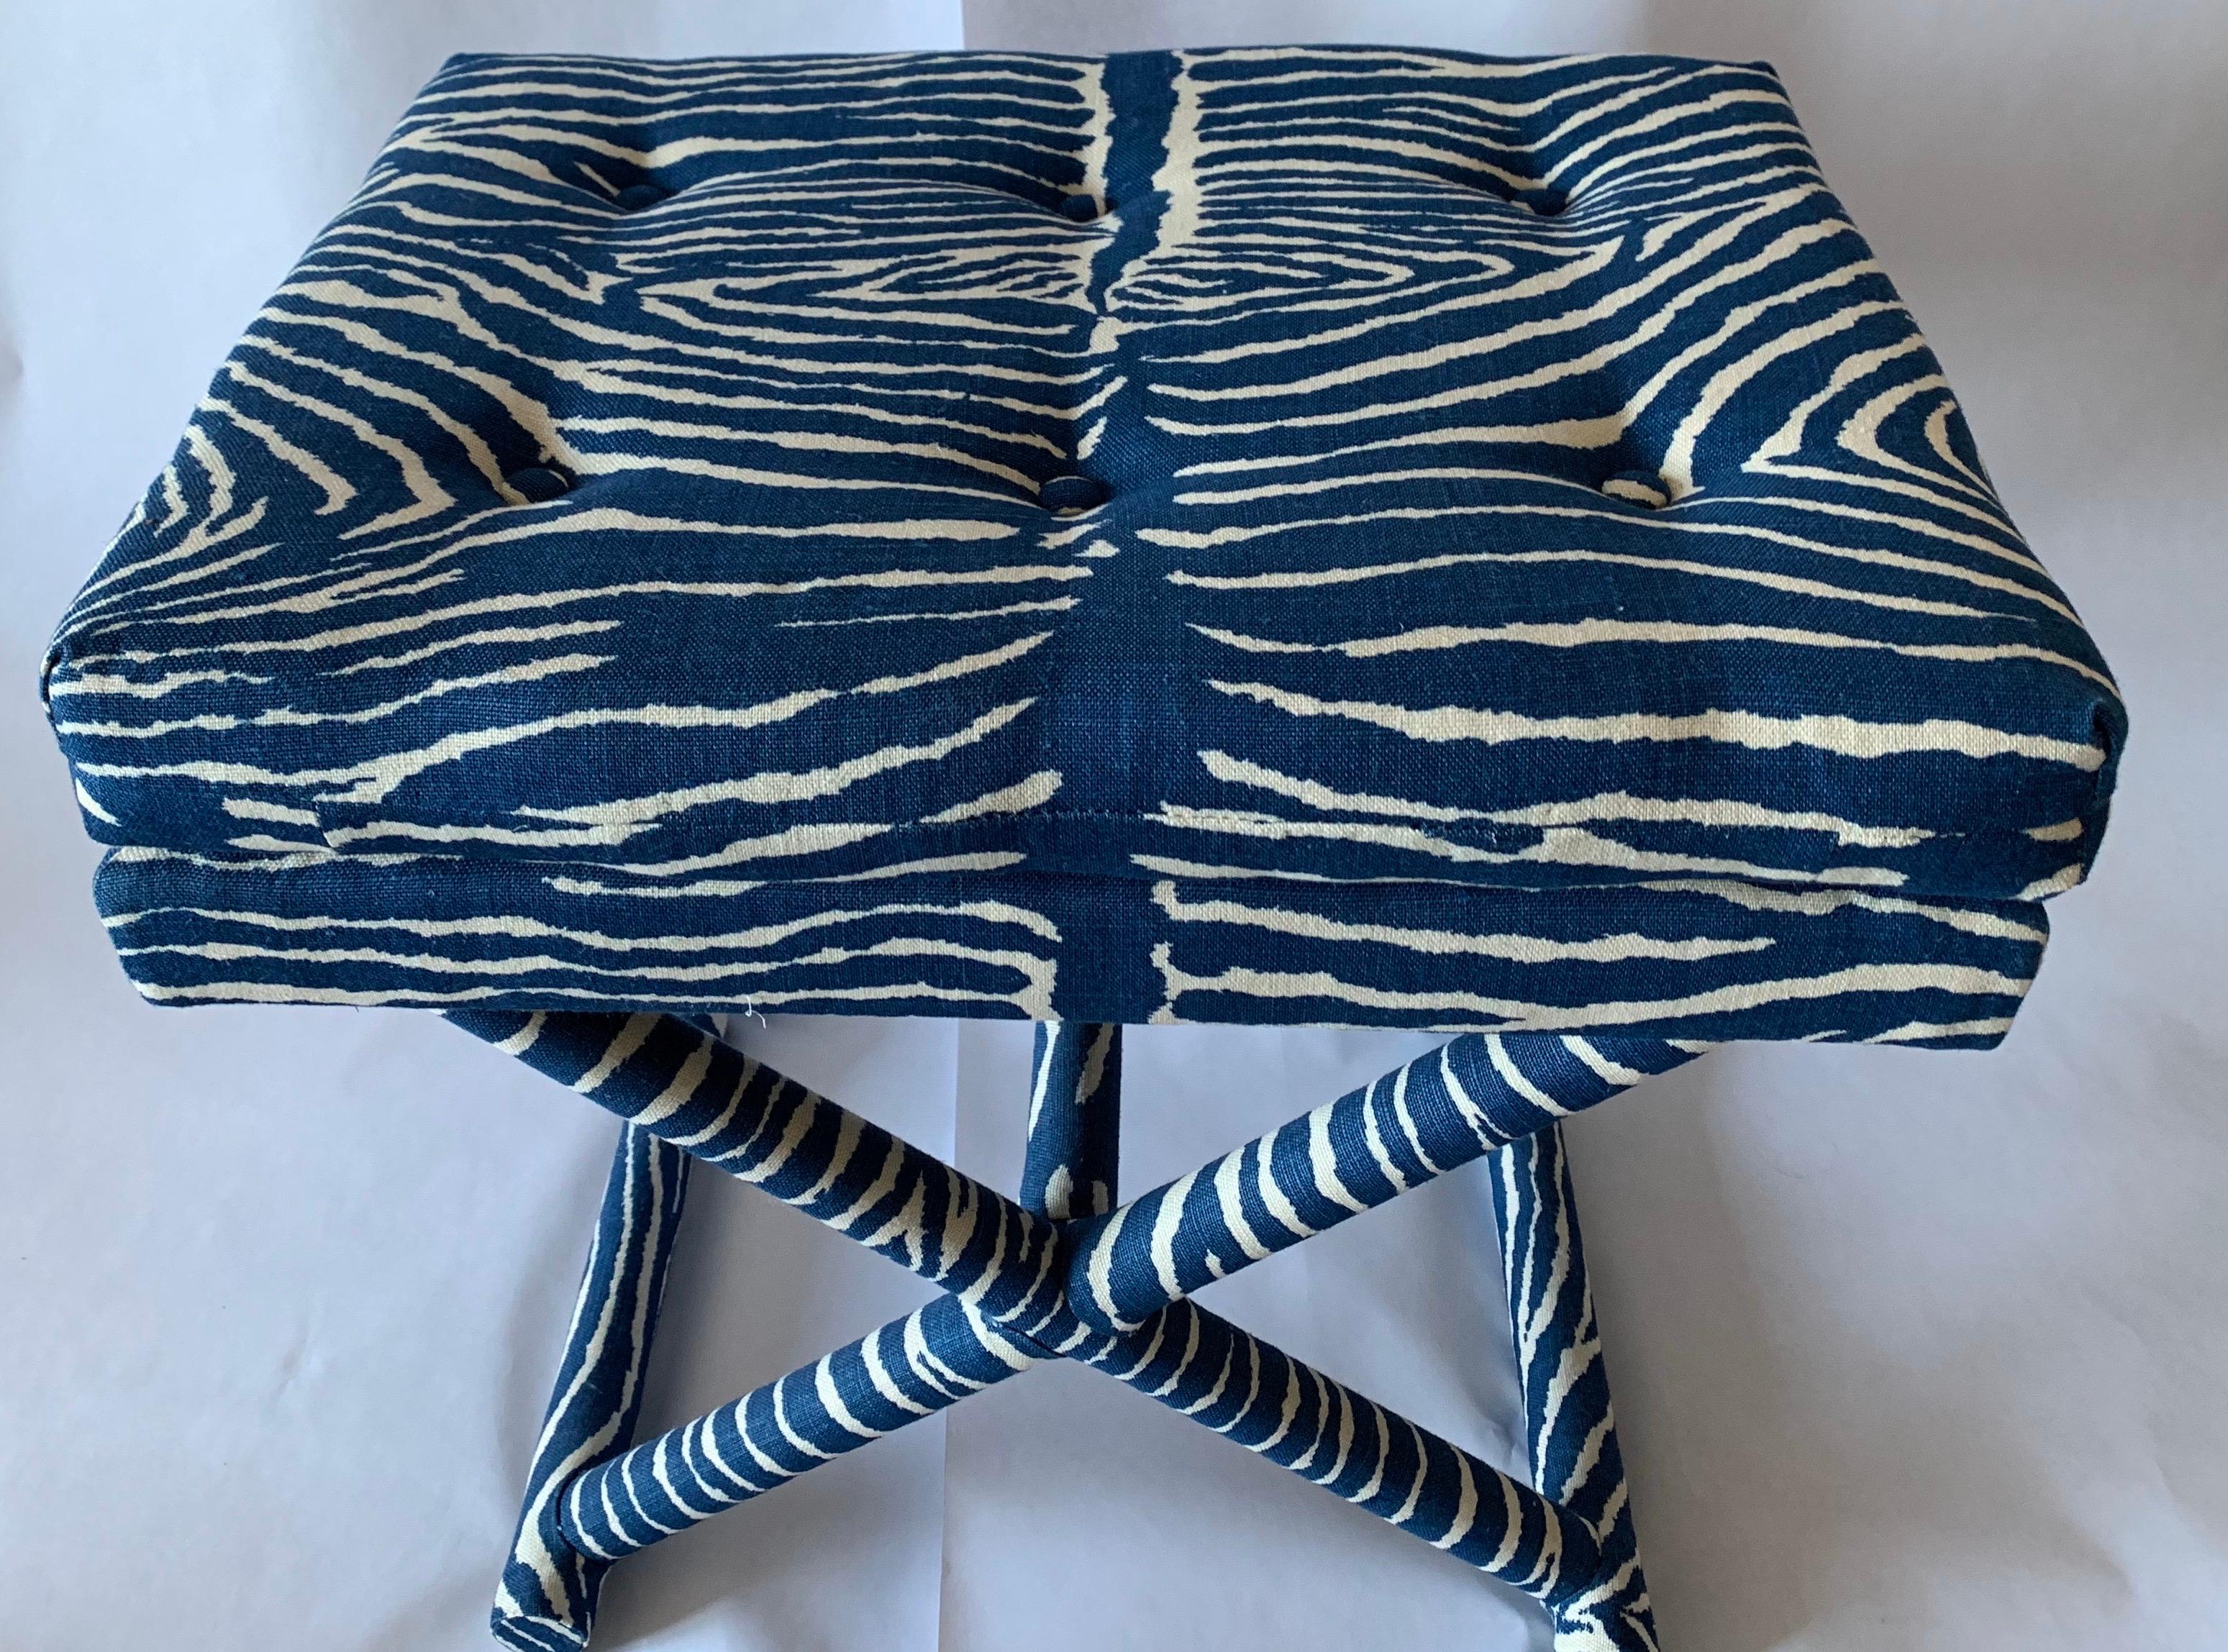 1970s X-bench newly upholstered in Brunschwig & Fils Le Zebre printed linen in blue/ white. Tufted pillow top attached cushion. Fully upholstered design.